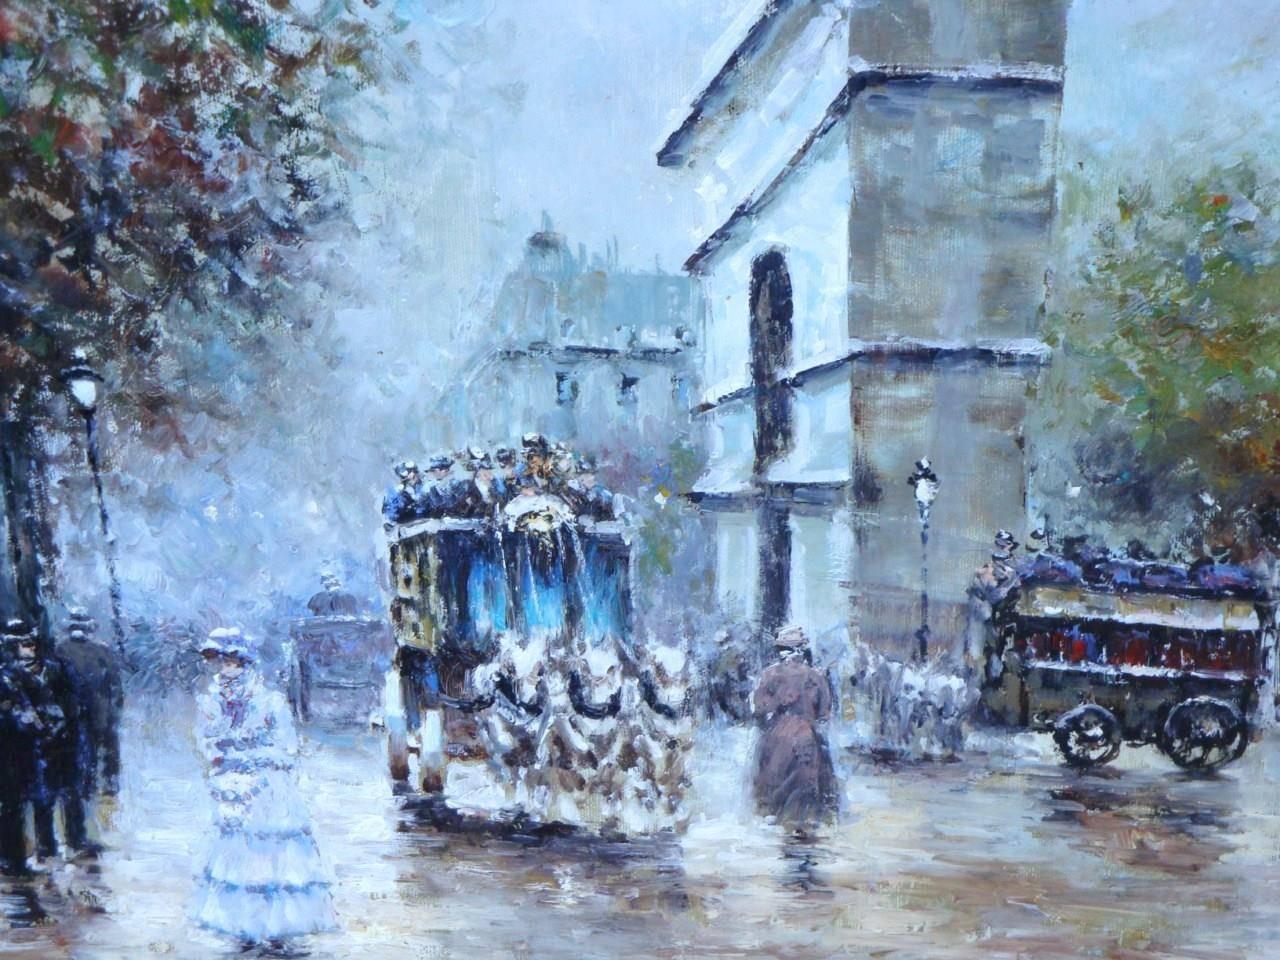 A beautiful extra large deluxe original oil on canvas Parisian street painting. Taken out of an Important Sutton Place Estate of Mary McKinley, a descendant to the late President William McKinley. Signed by Artist Jacques Gaston. Painting features